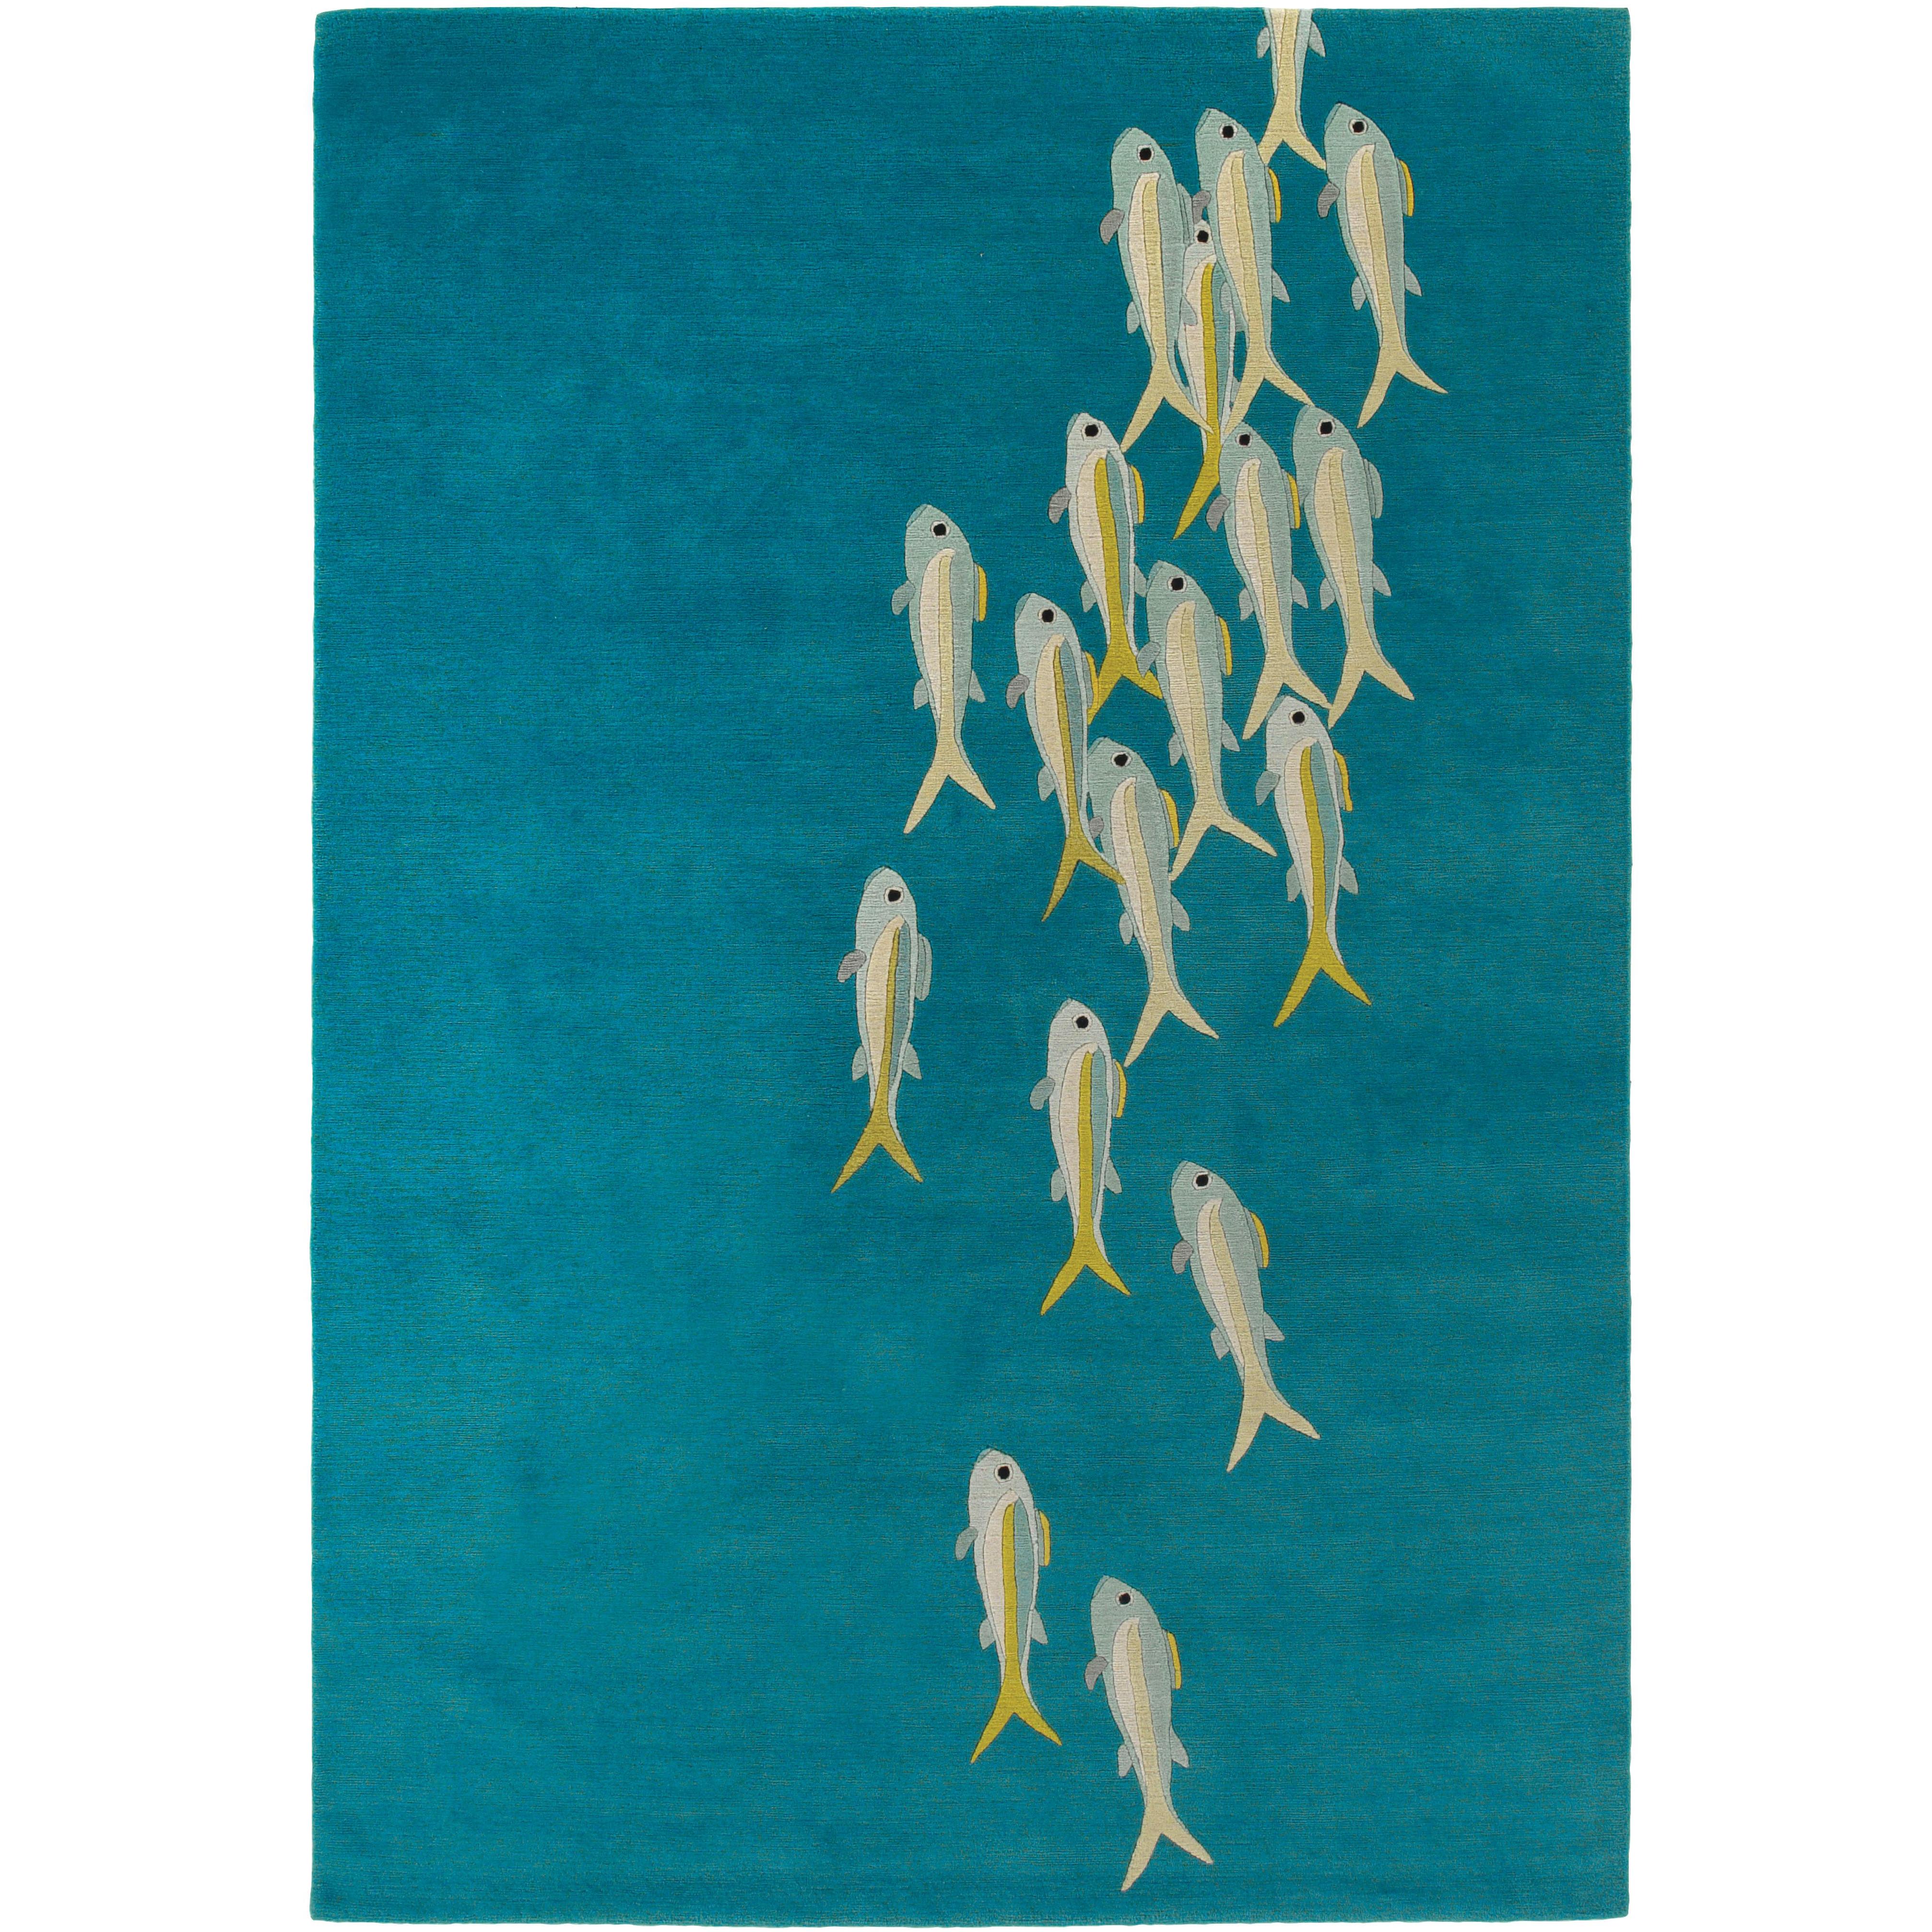 Fishes Hand-Knotted 10x8 Rug in Wool by Edward Barber & Jay Osgerby